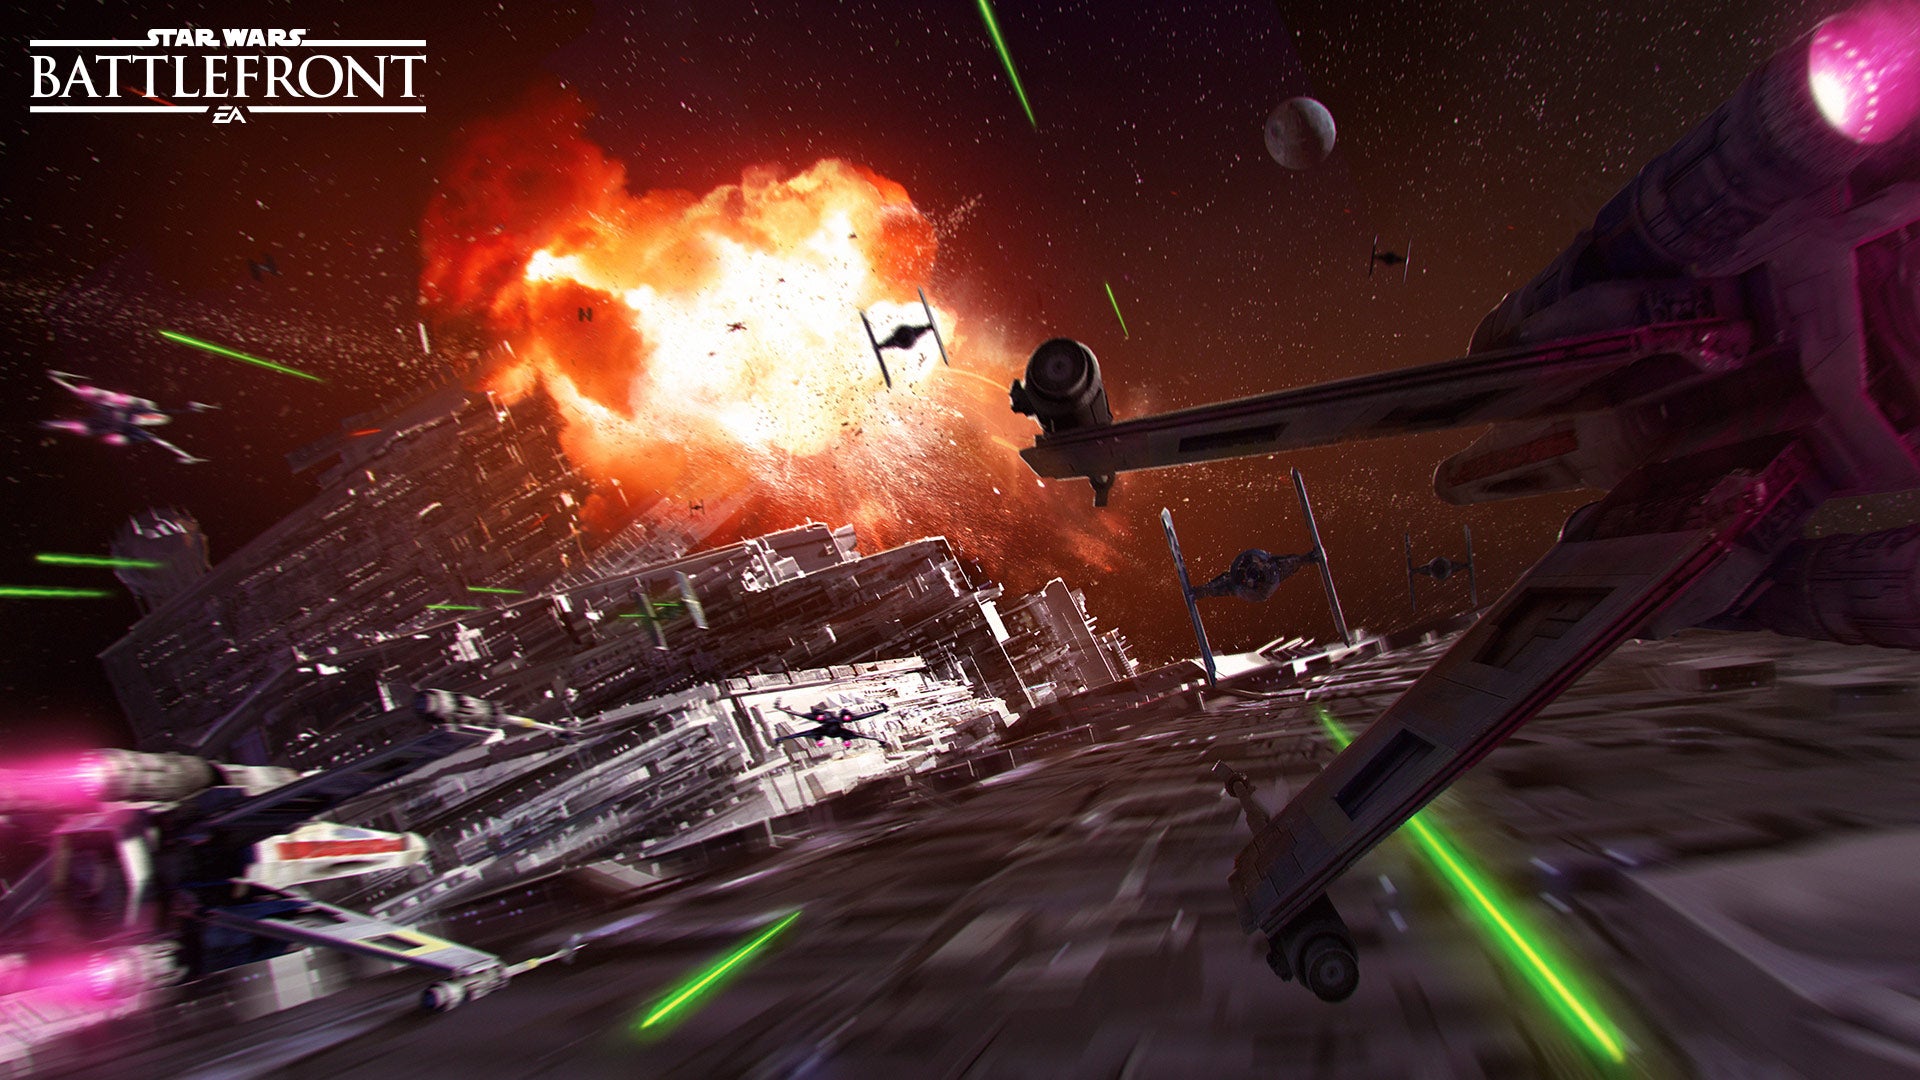 Image for Get Star Wars Battlefront for under $18 on PS4 and Xbox One